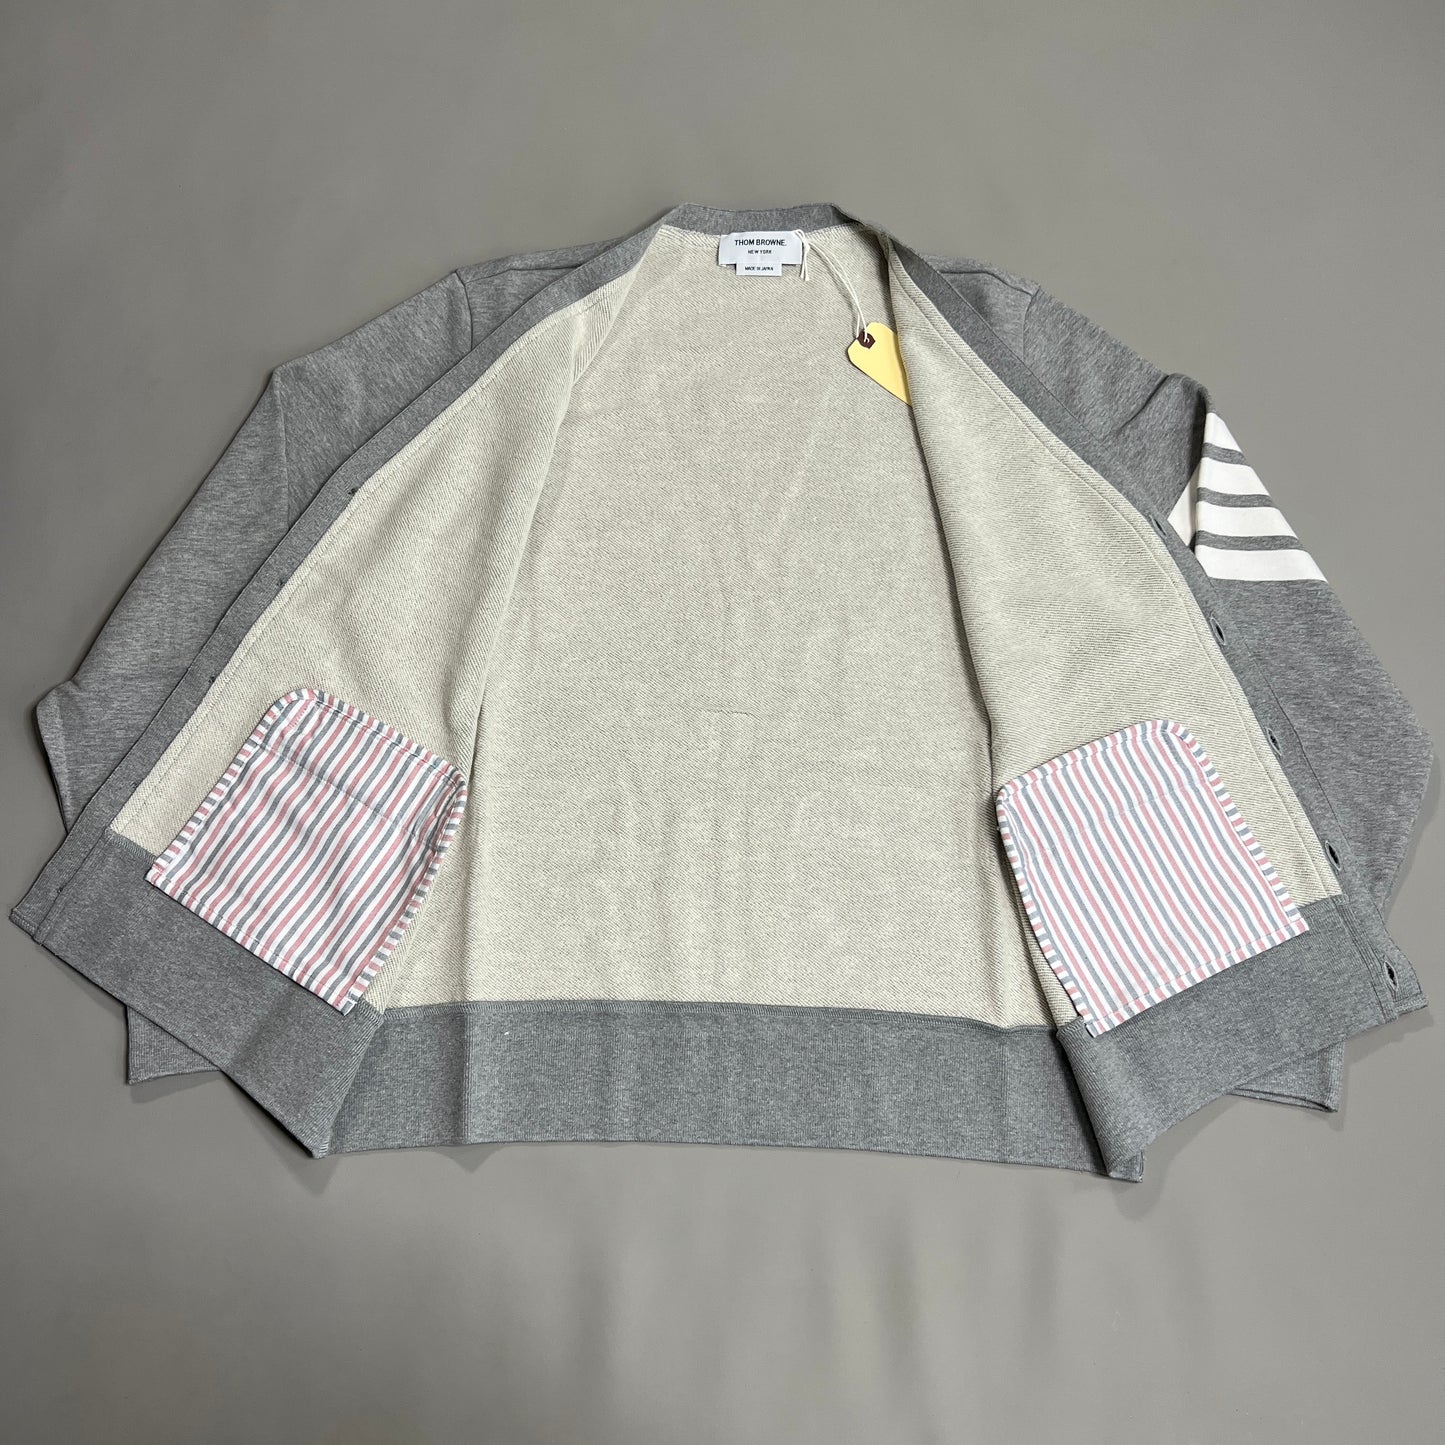 THOM BROWNE V-NECK Cardigan w/ 4Bar in Jersey Loopback Light Grey Size 1 (New)